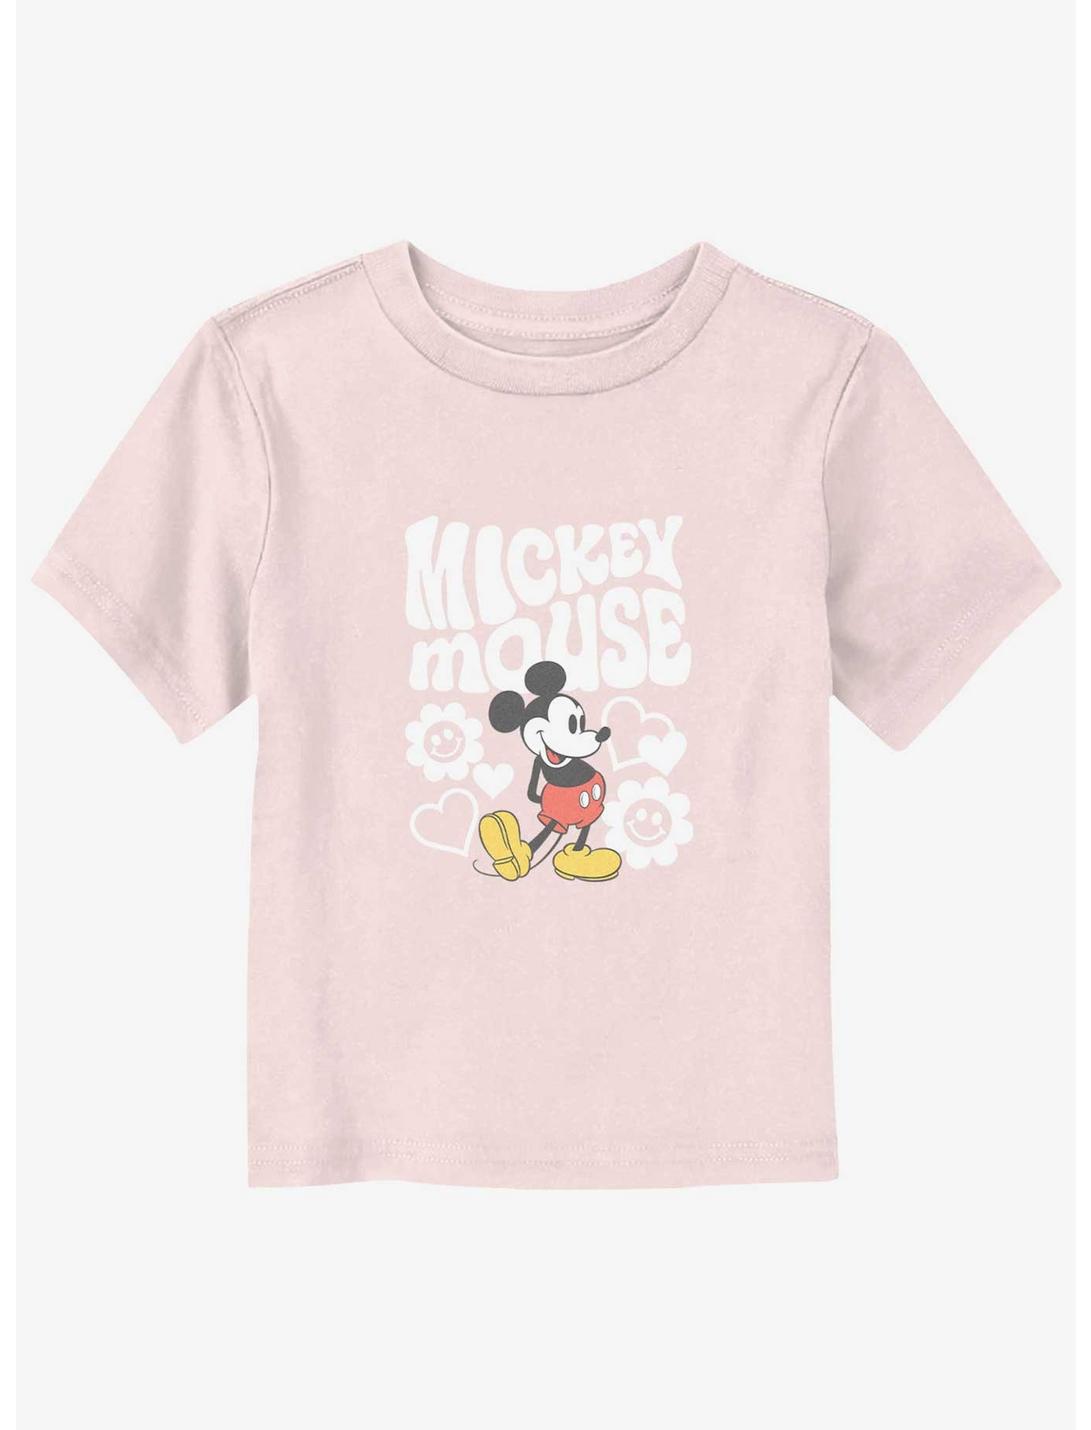 Disney Mickey Mouse Groovy And Flowers Toddler T-Shirt, LIGHT PINK, hi-res